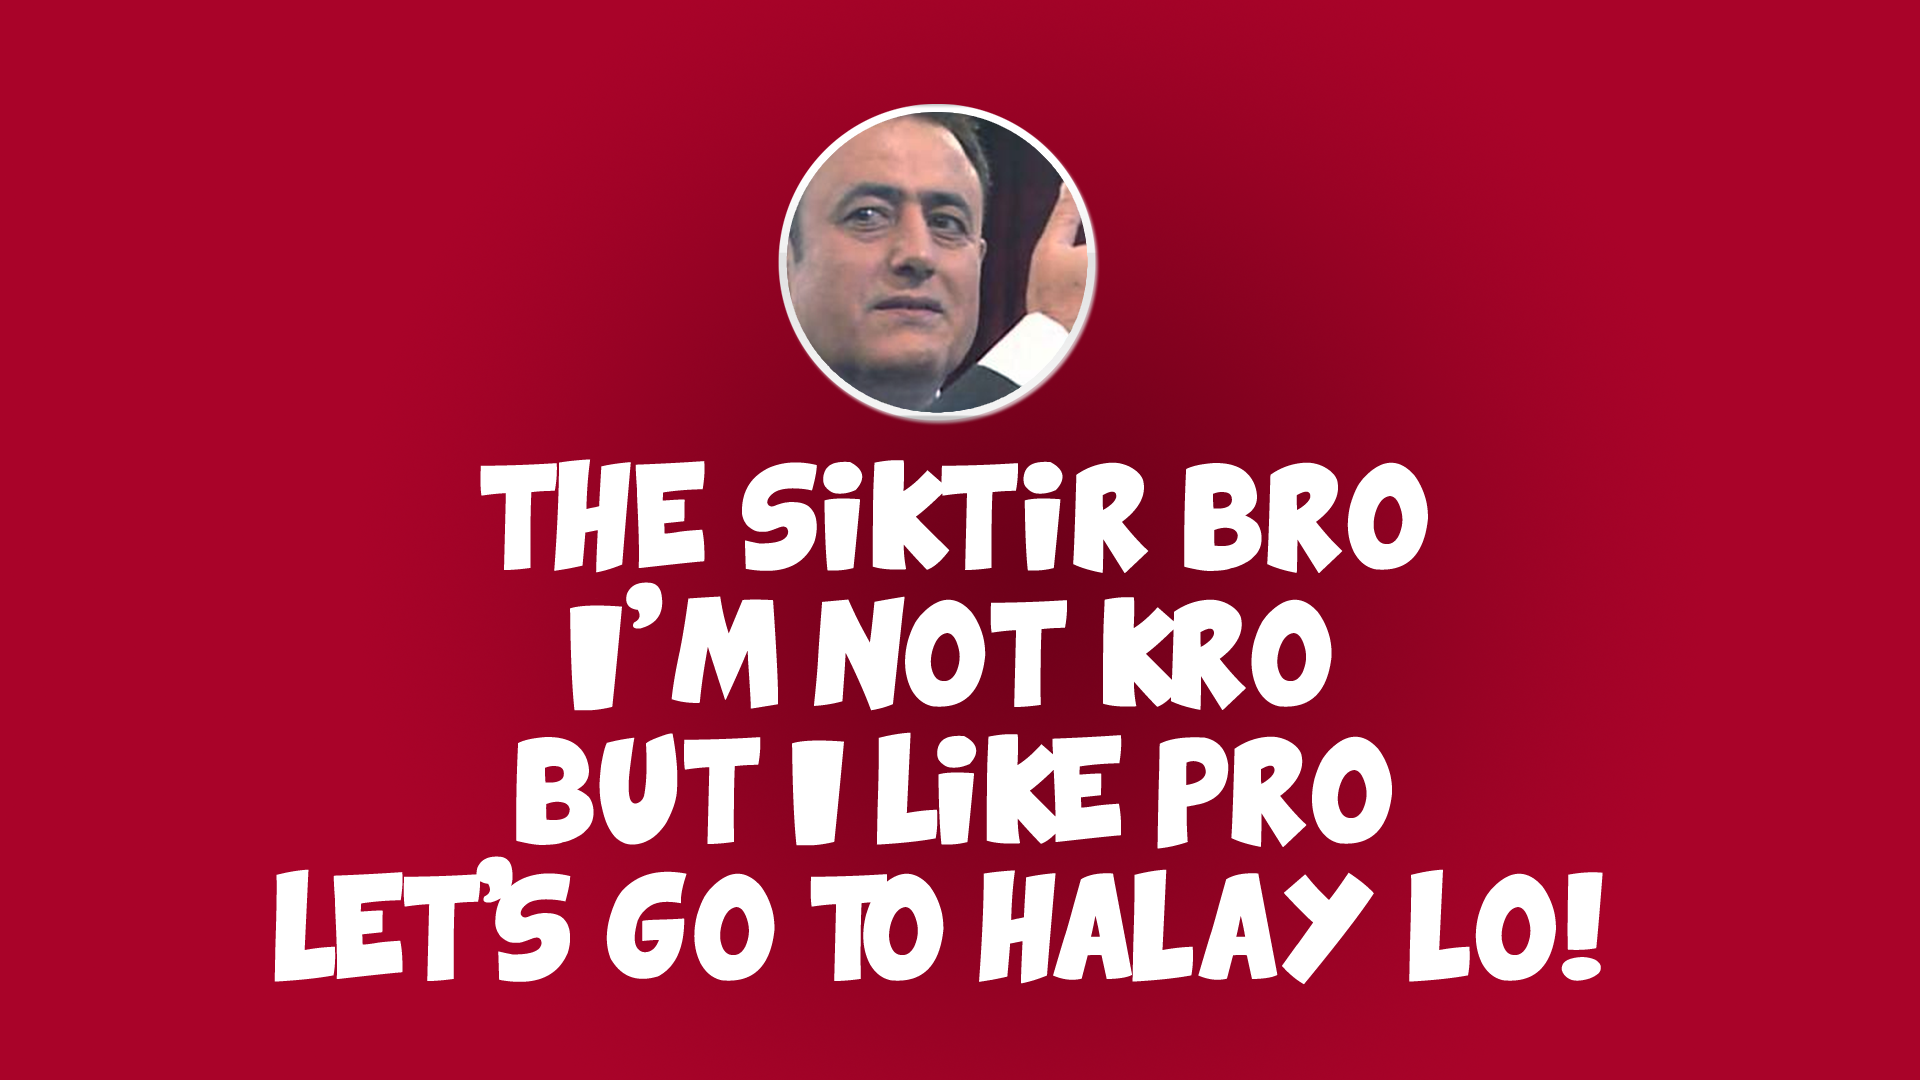 General 1920x1080 Mahmut Tuncer Halay men red background red